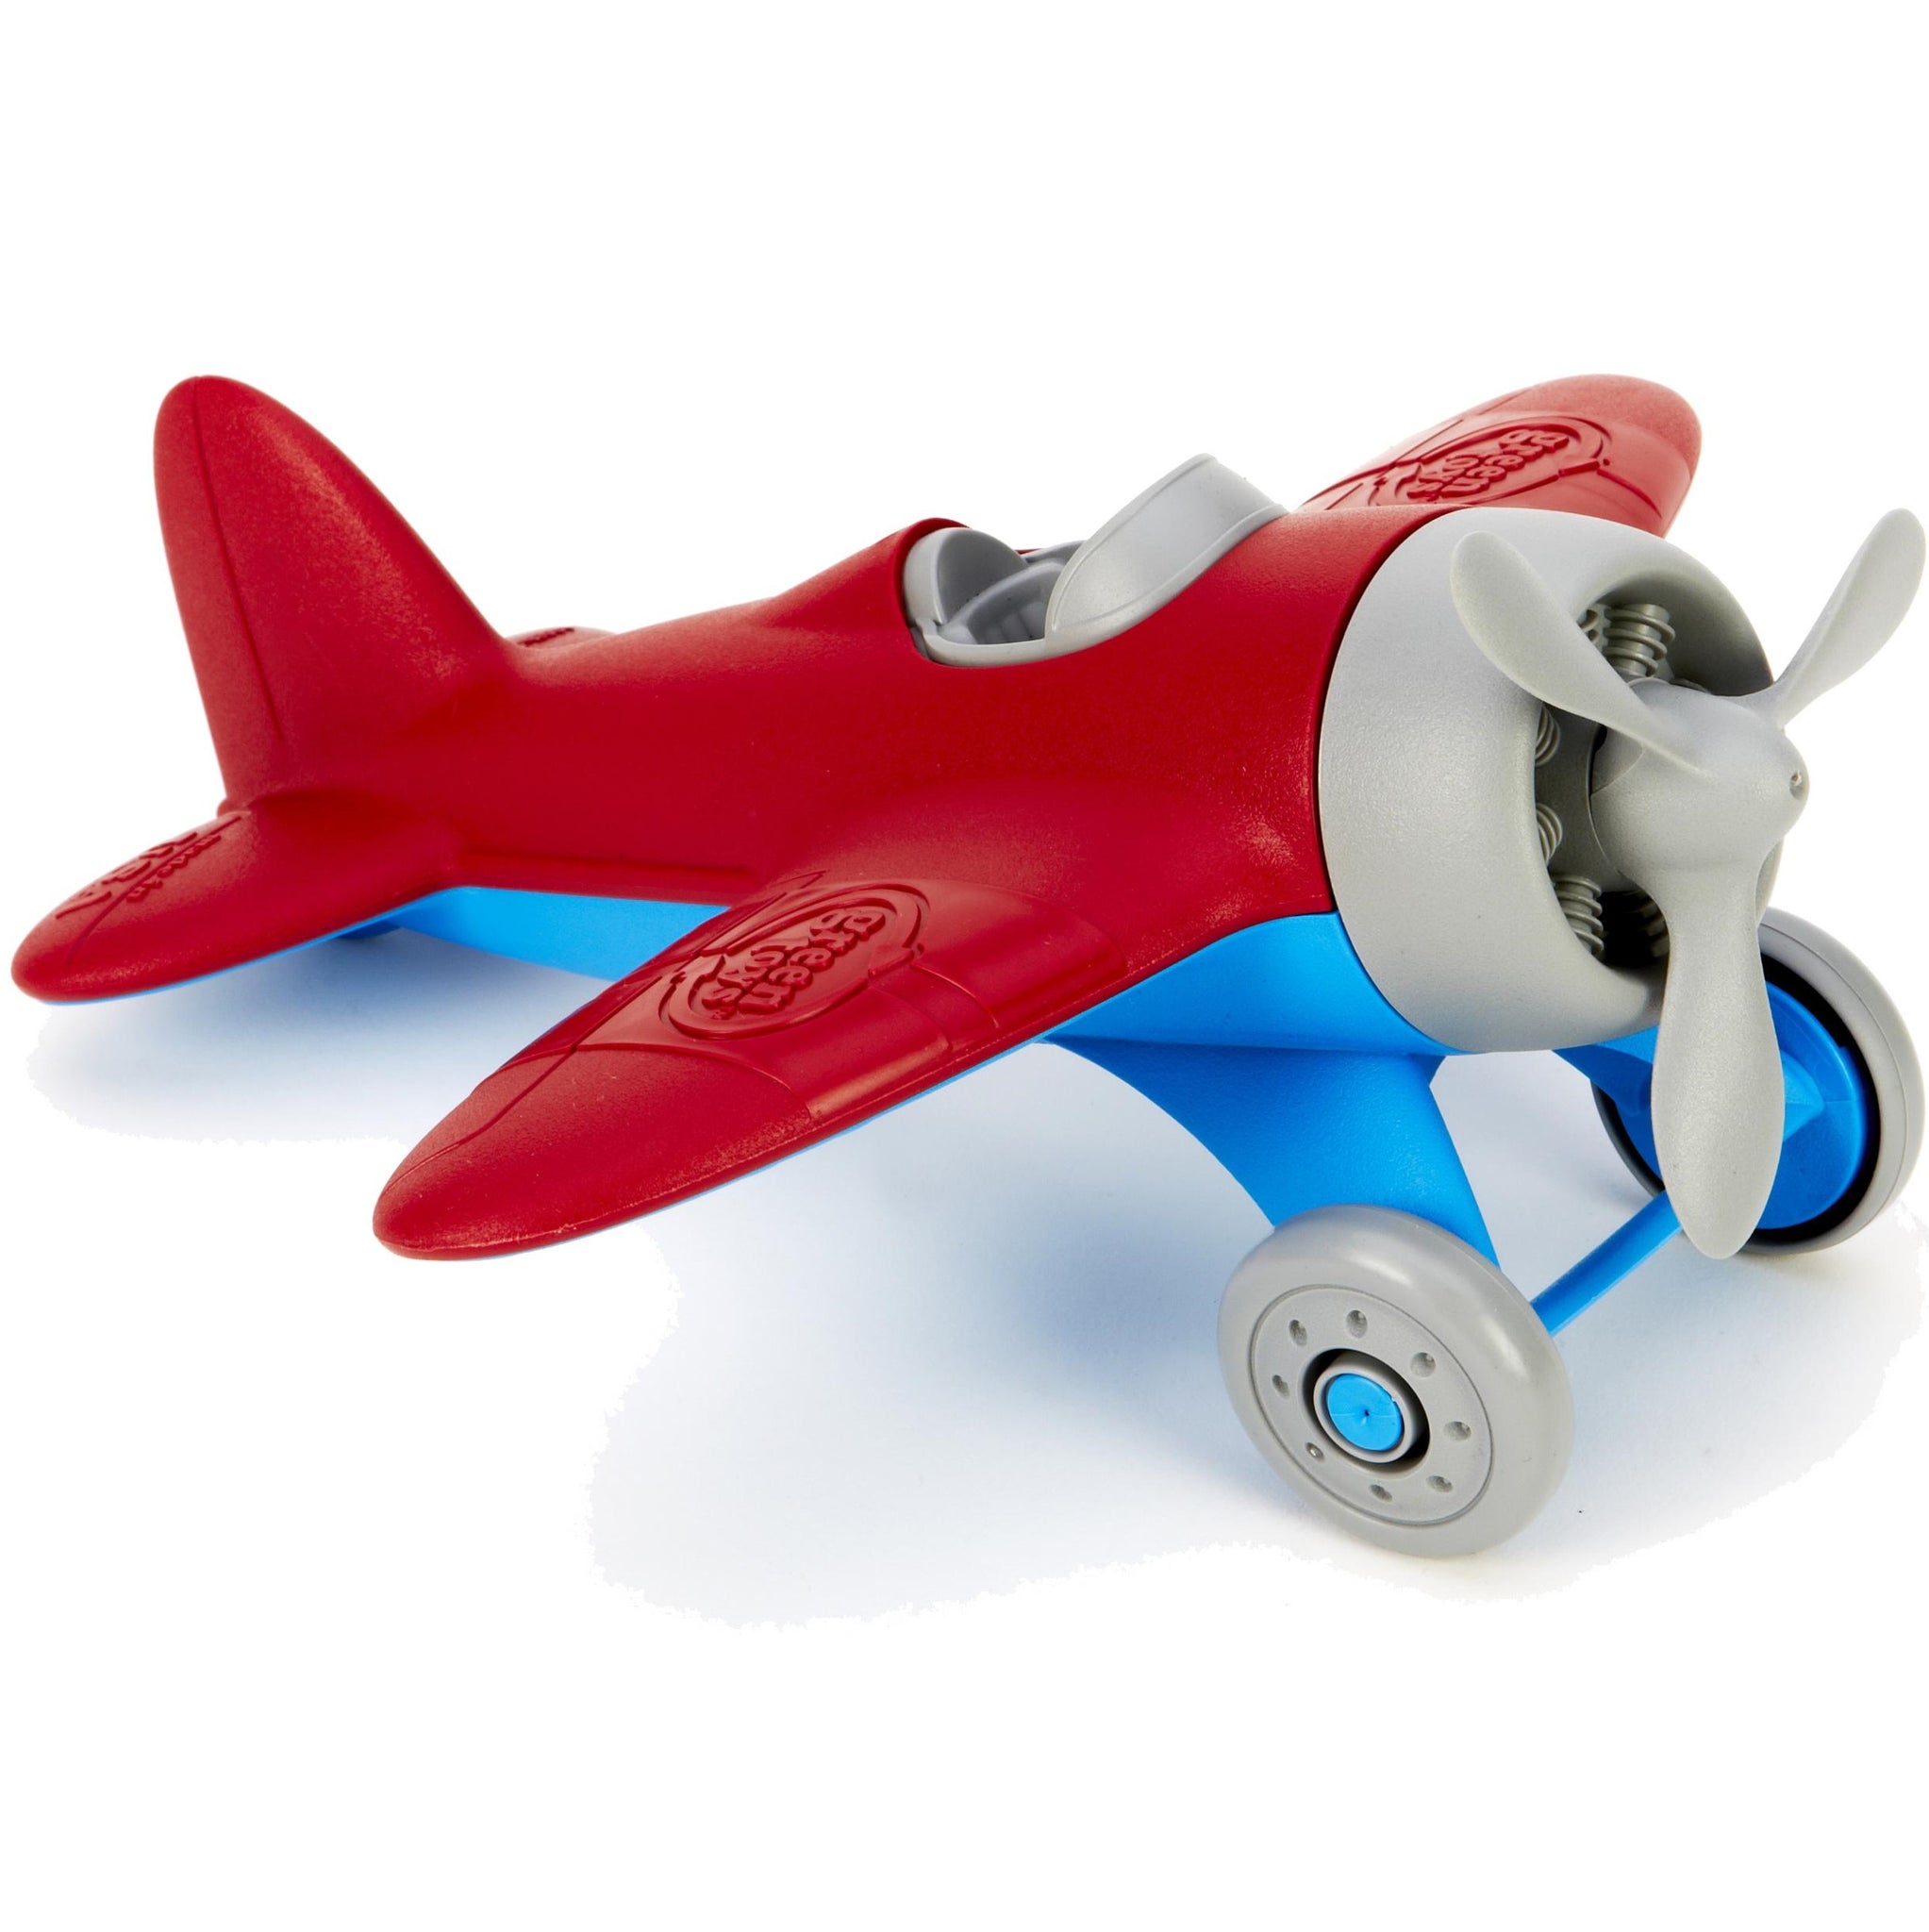 red airplane toy